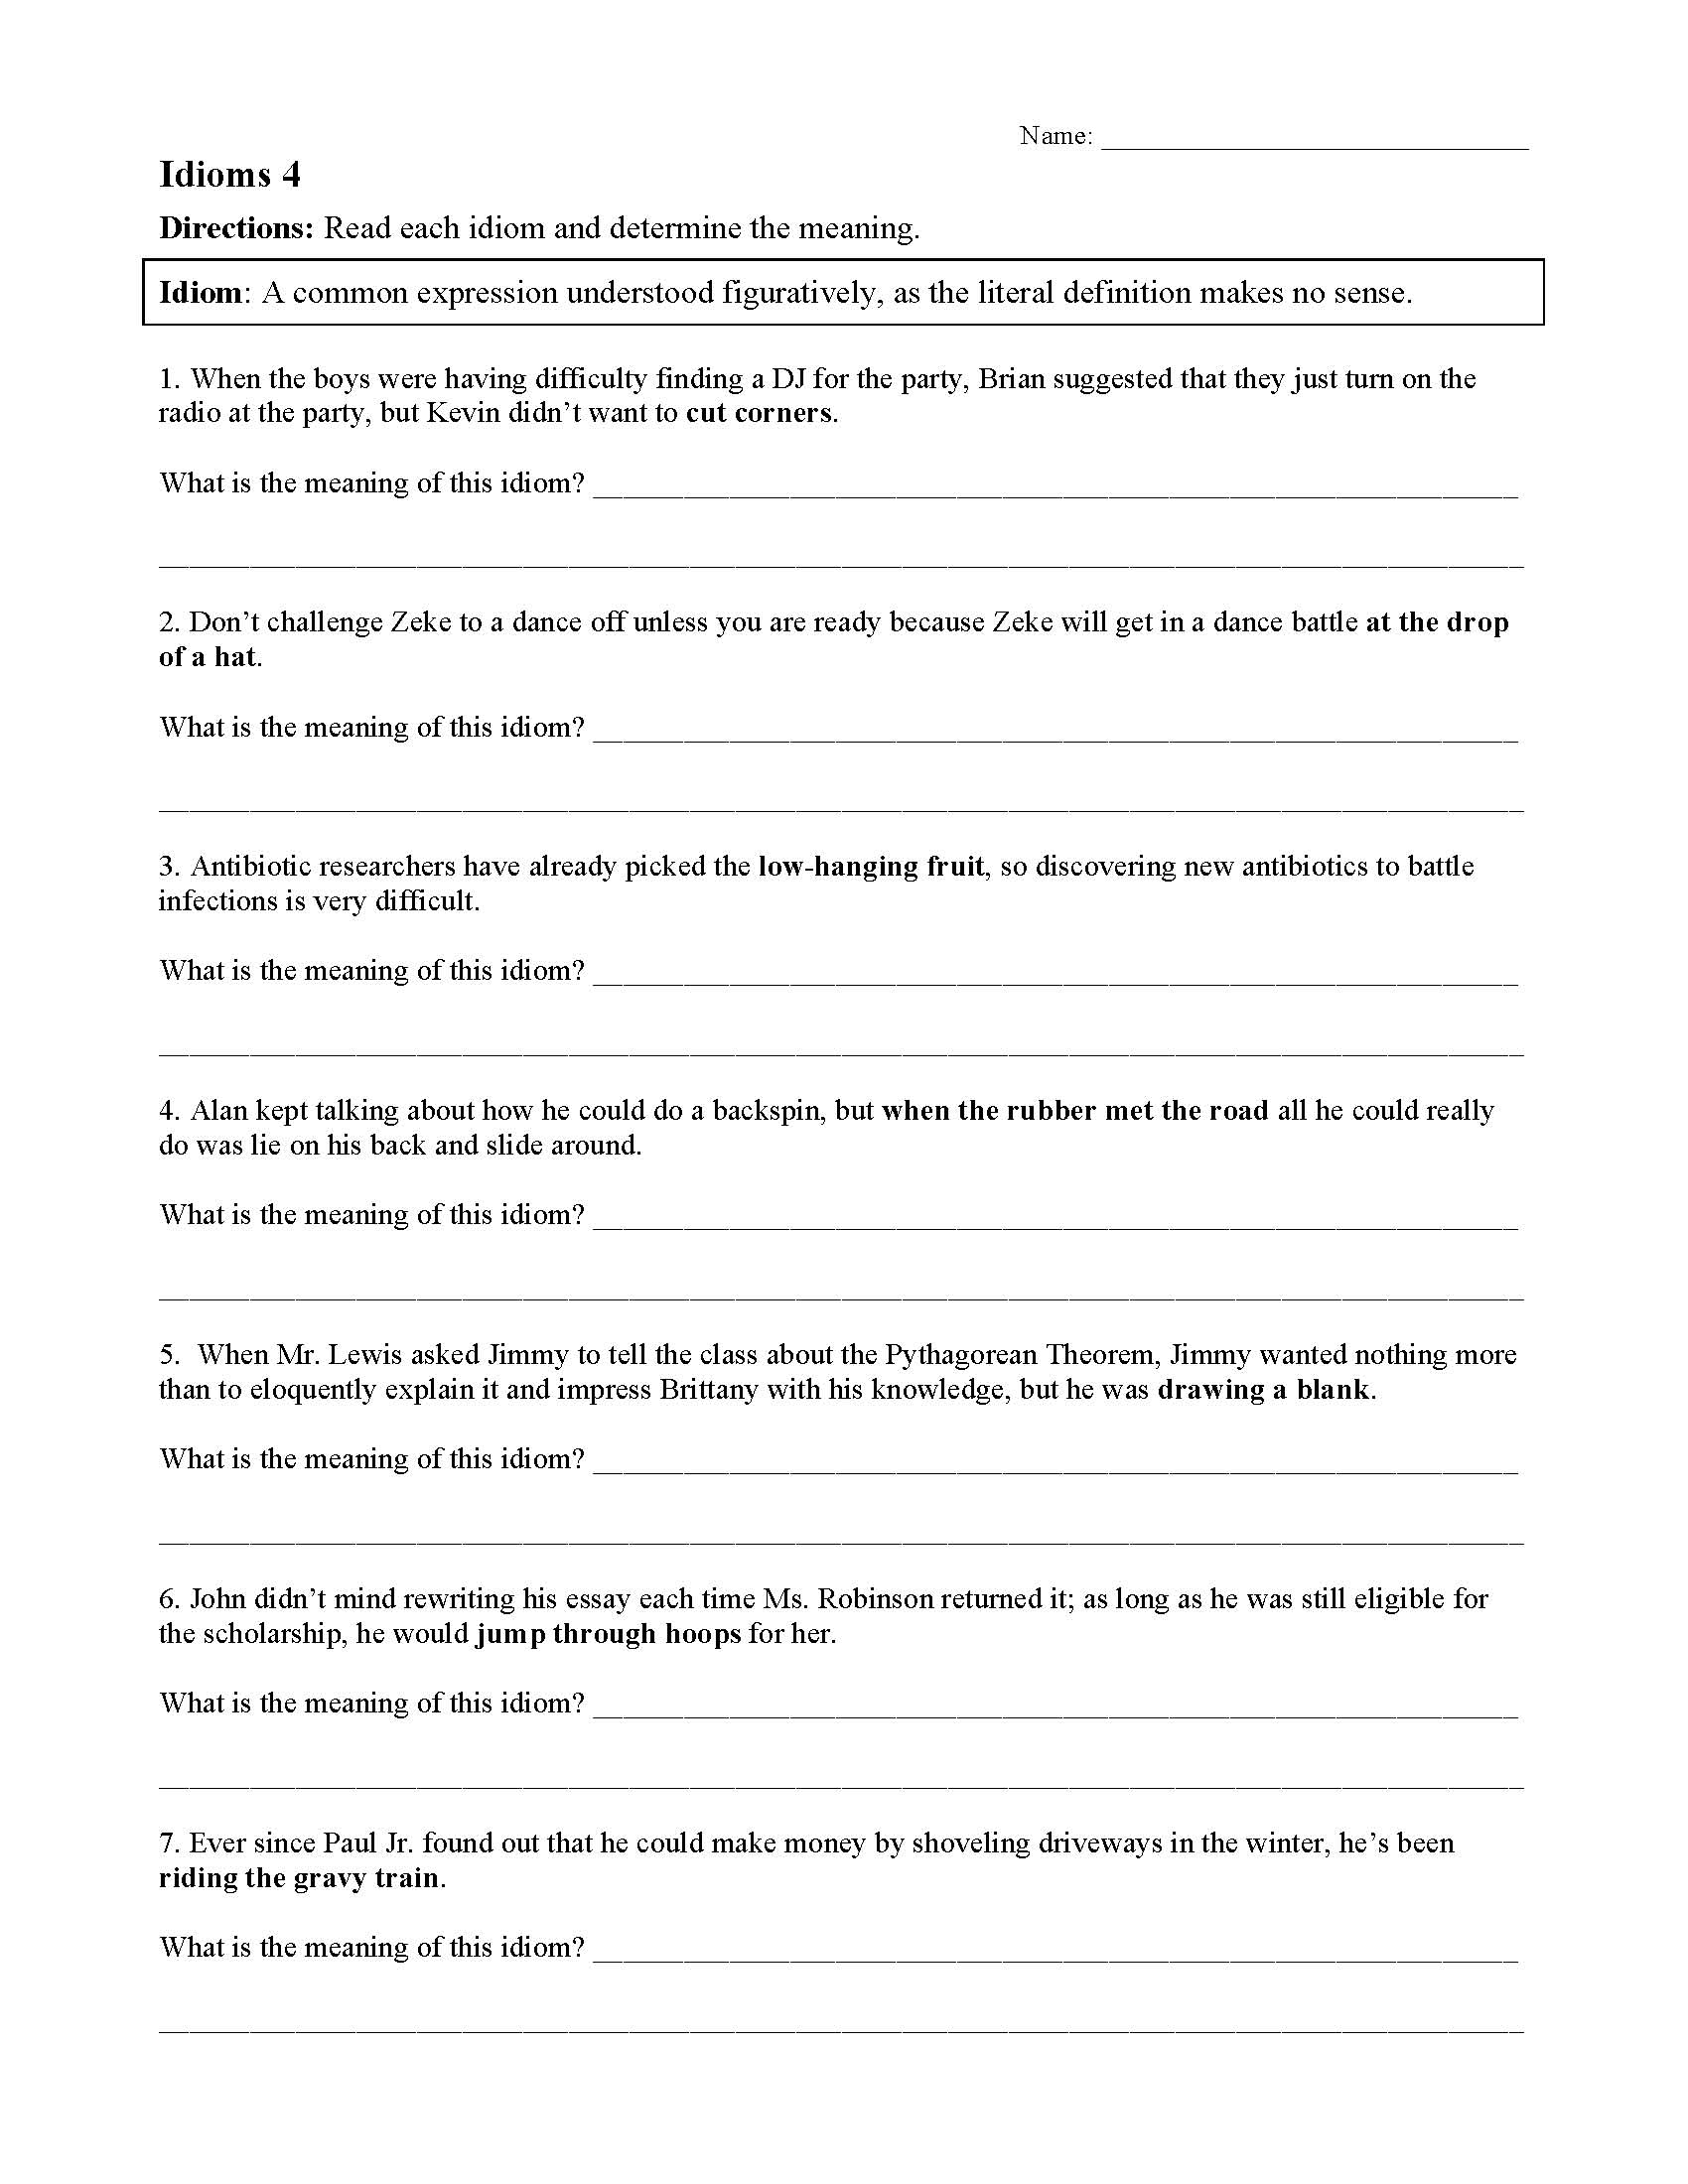 This is a preview image of Idiom Worksheet 4. Click on it to enlarge it or view the source file.